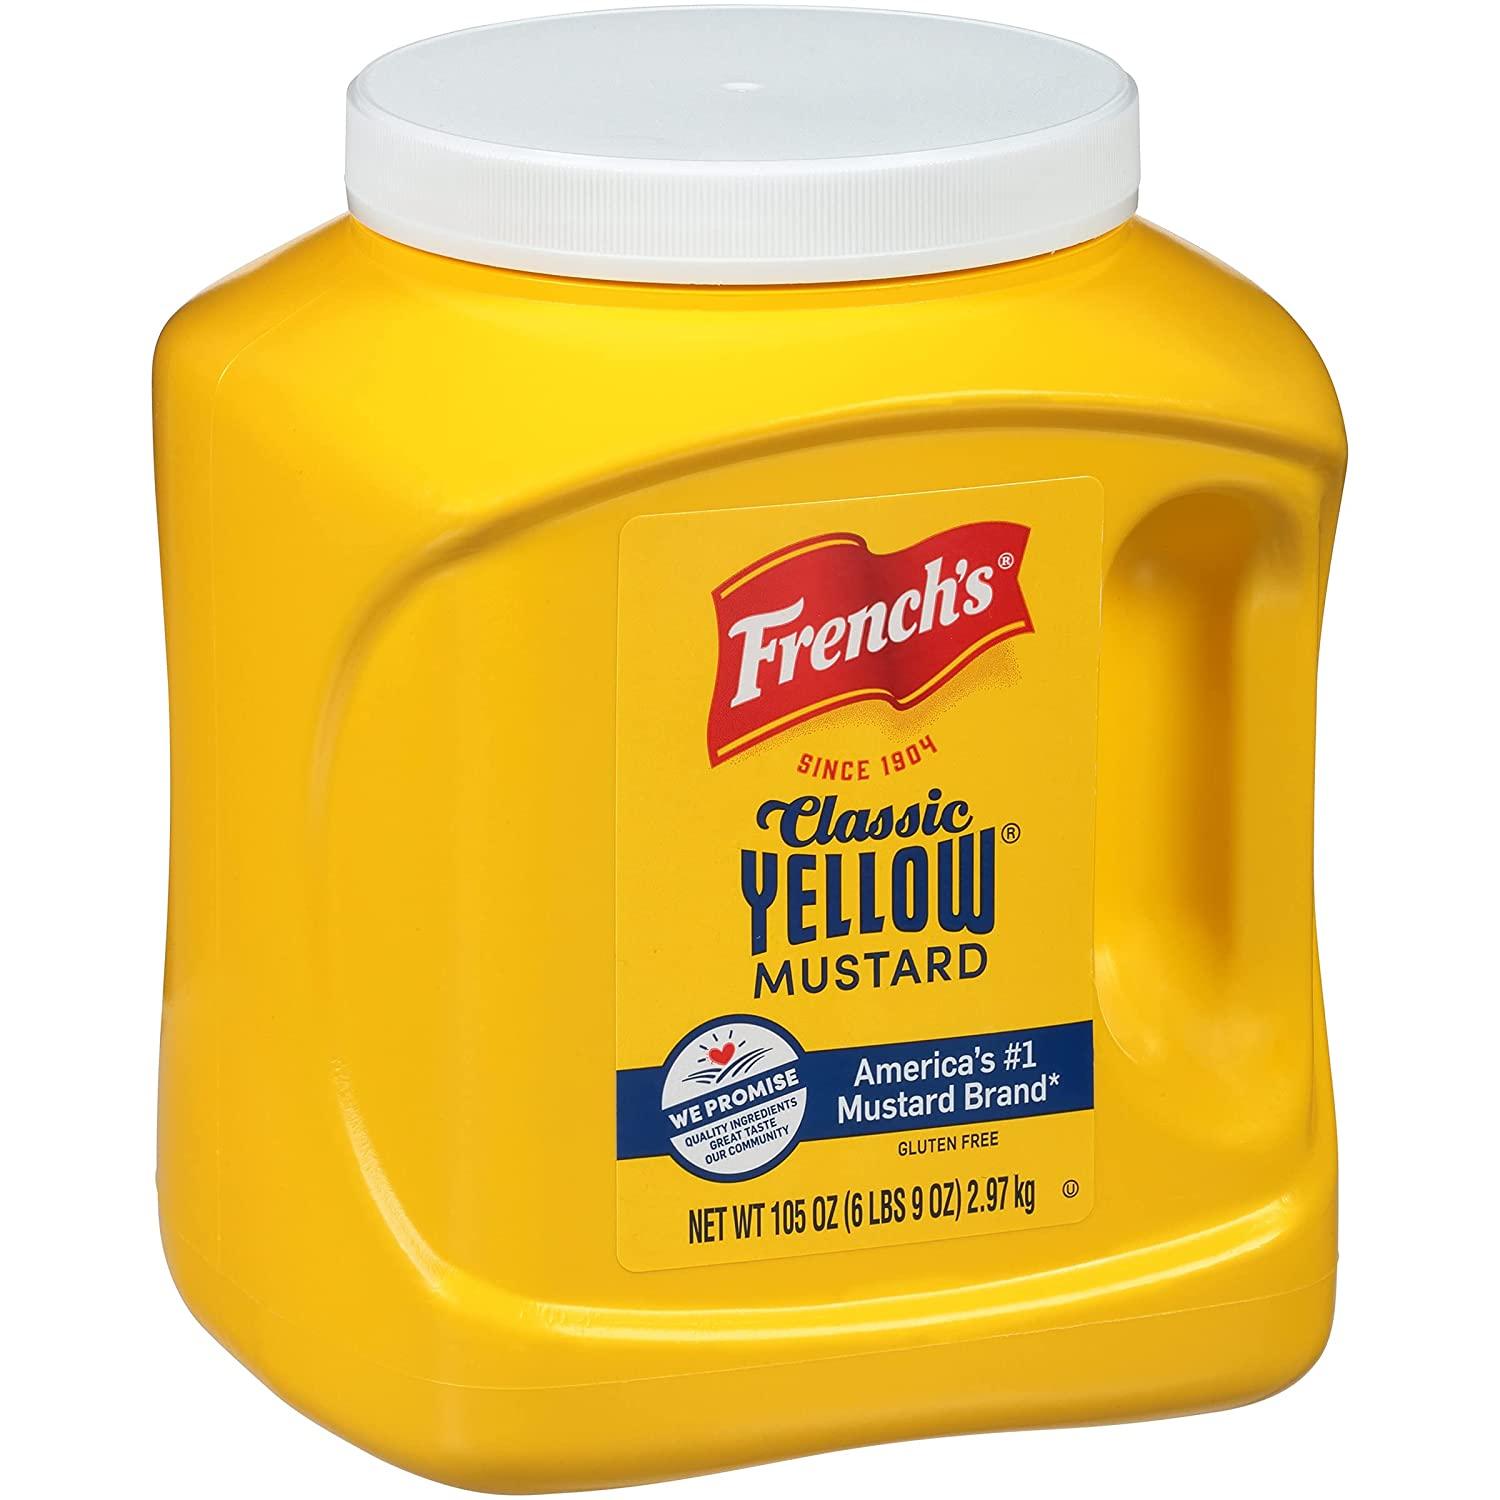 Frenchs Classic Yellow Mustard for $4.54 Shipped